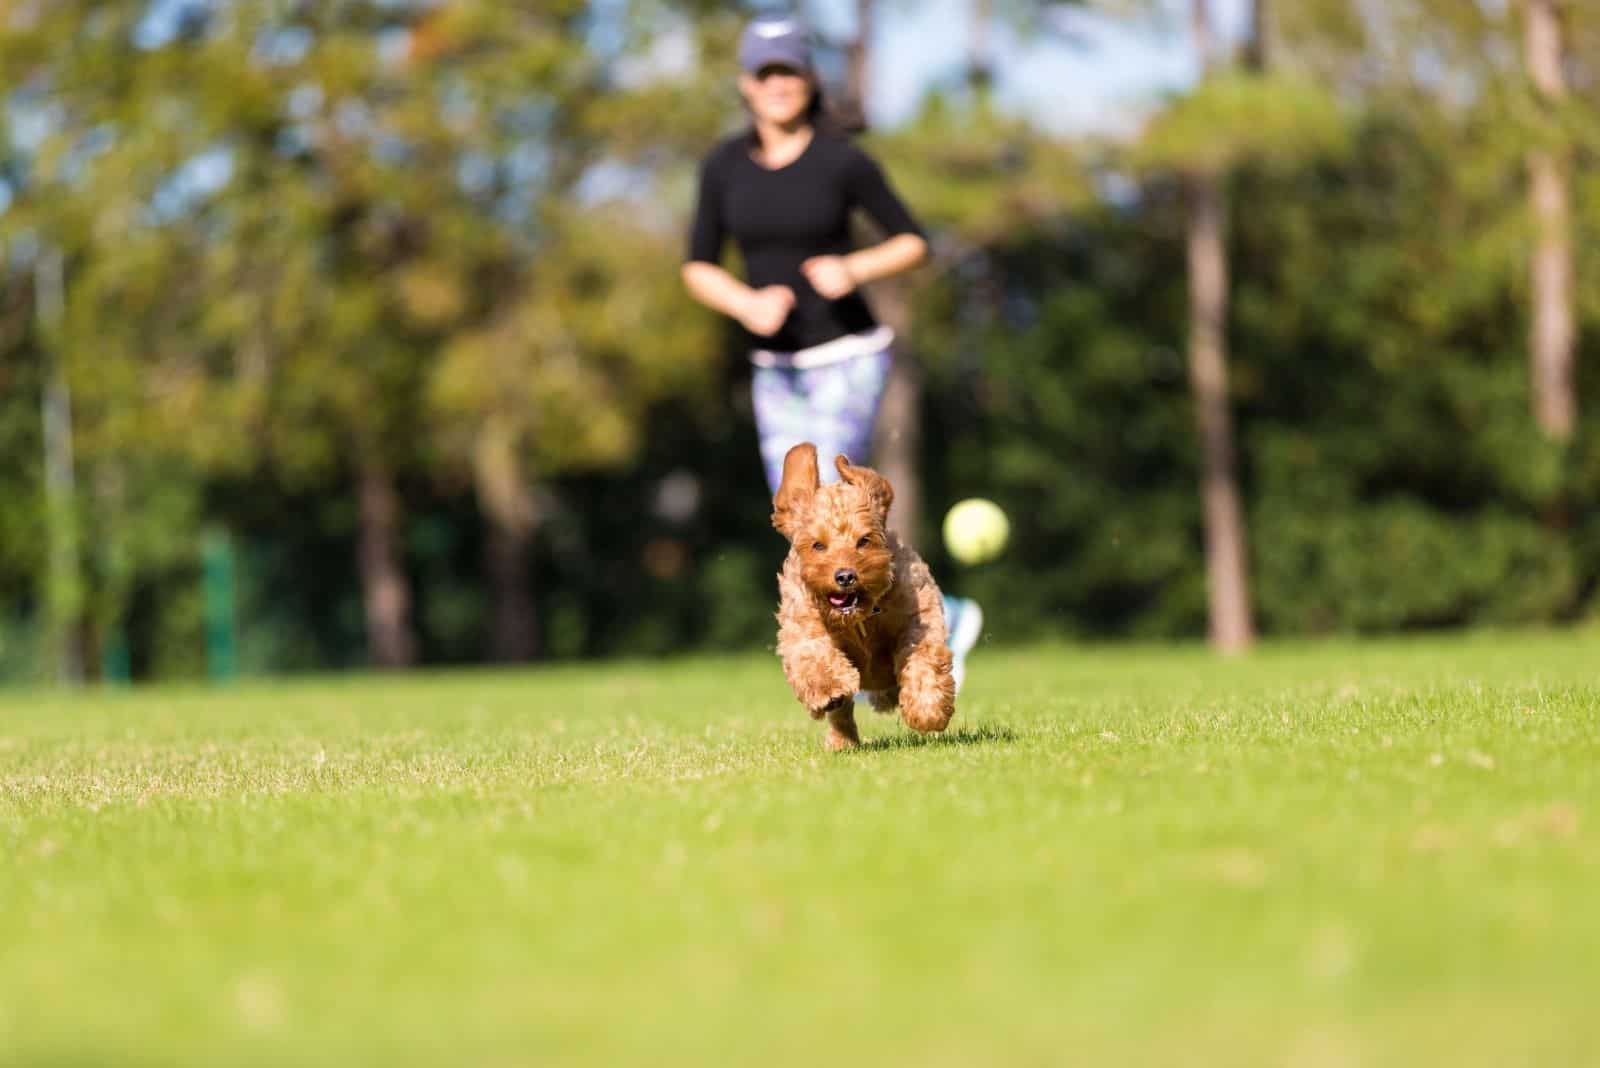 miniature goldendoodle playing fetch with a woman in the park